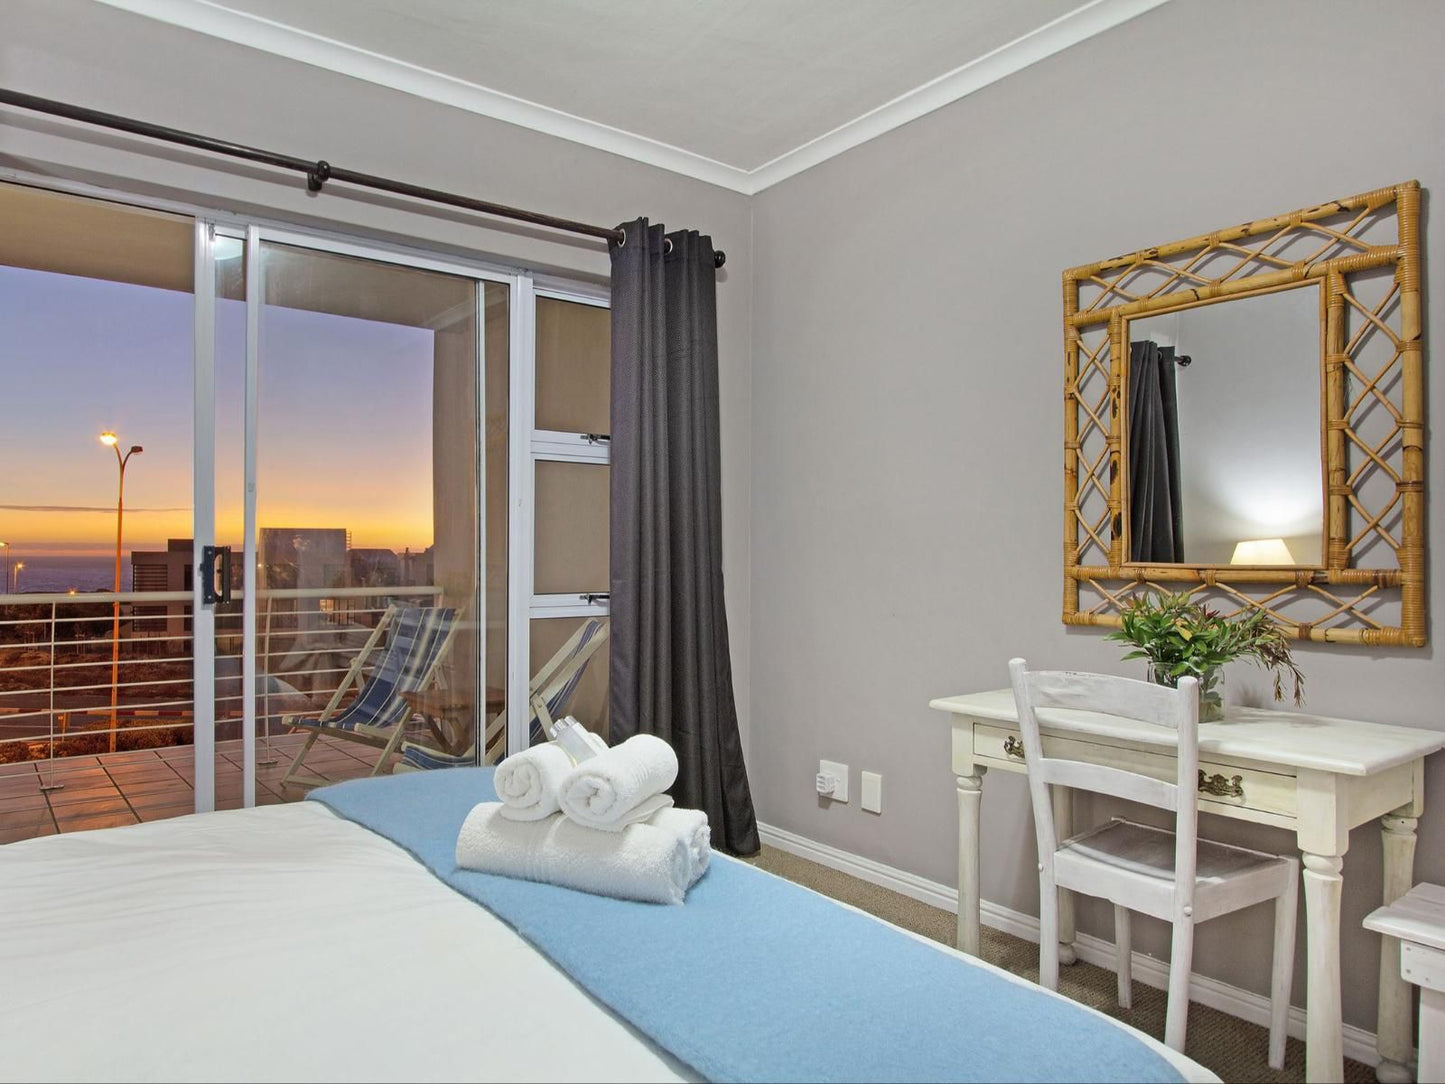 Dolphin Ridge 108 By Hostagents Bloubergstrand Blouberg Western Cape South Africa Bedroom